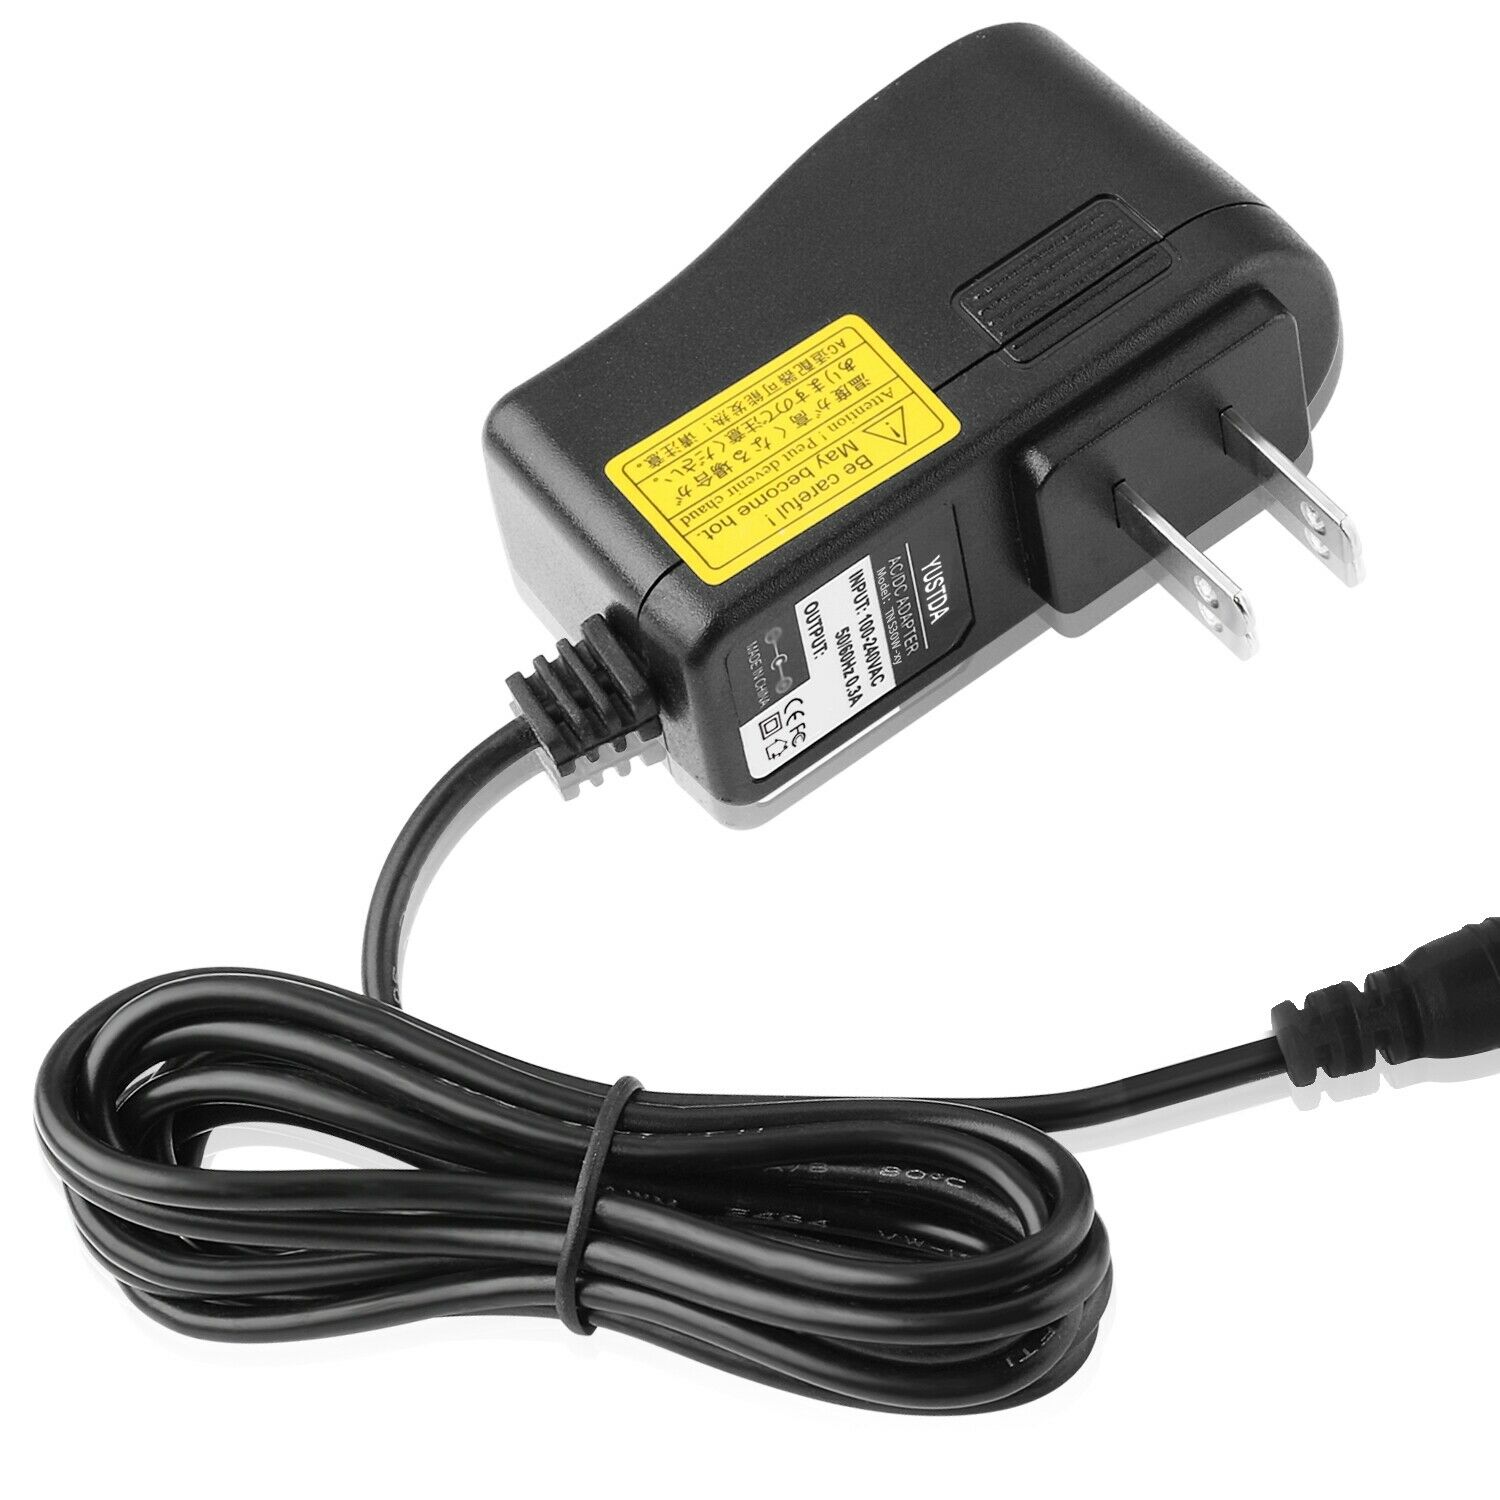 AC/DC Adapter Charger for WowWee CHiP Robot Toy Dog - Smartbed Power Supply Cord